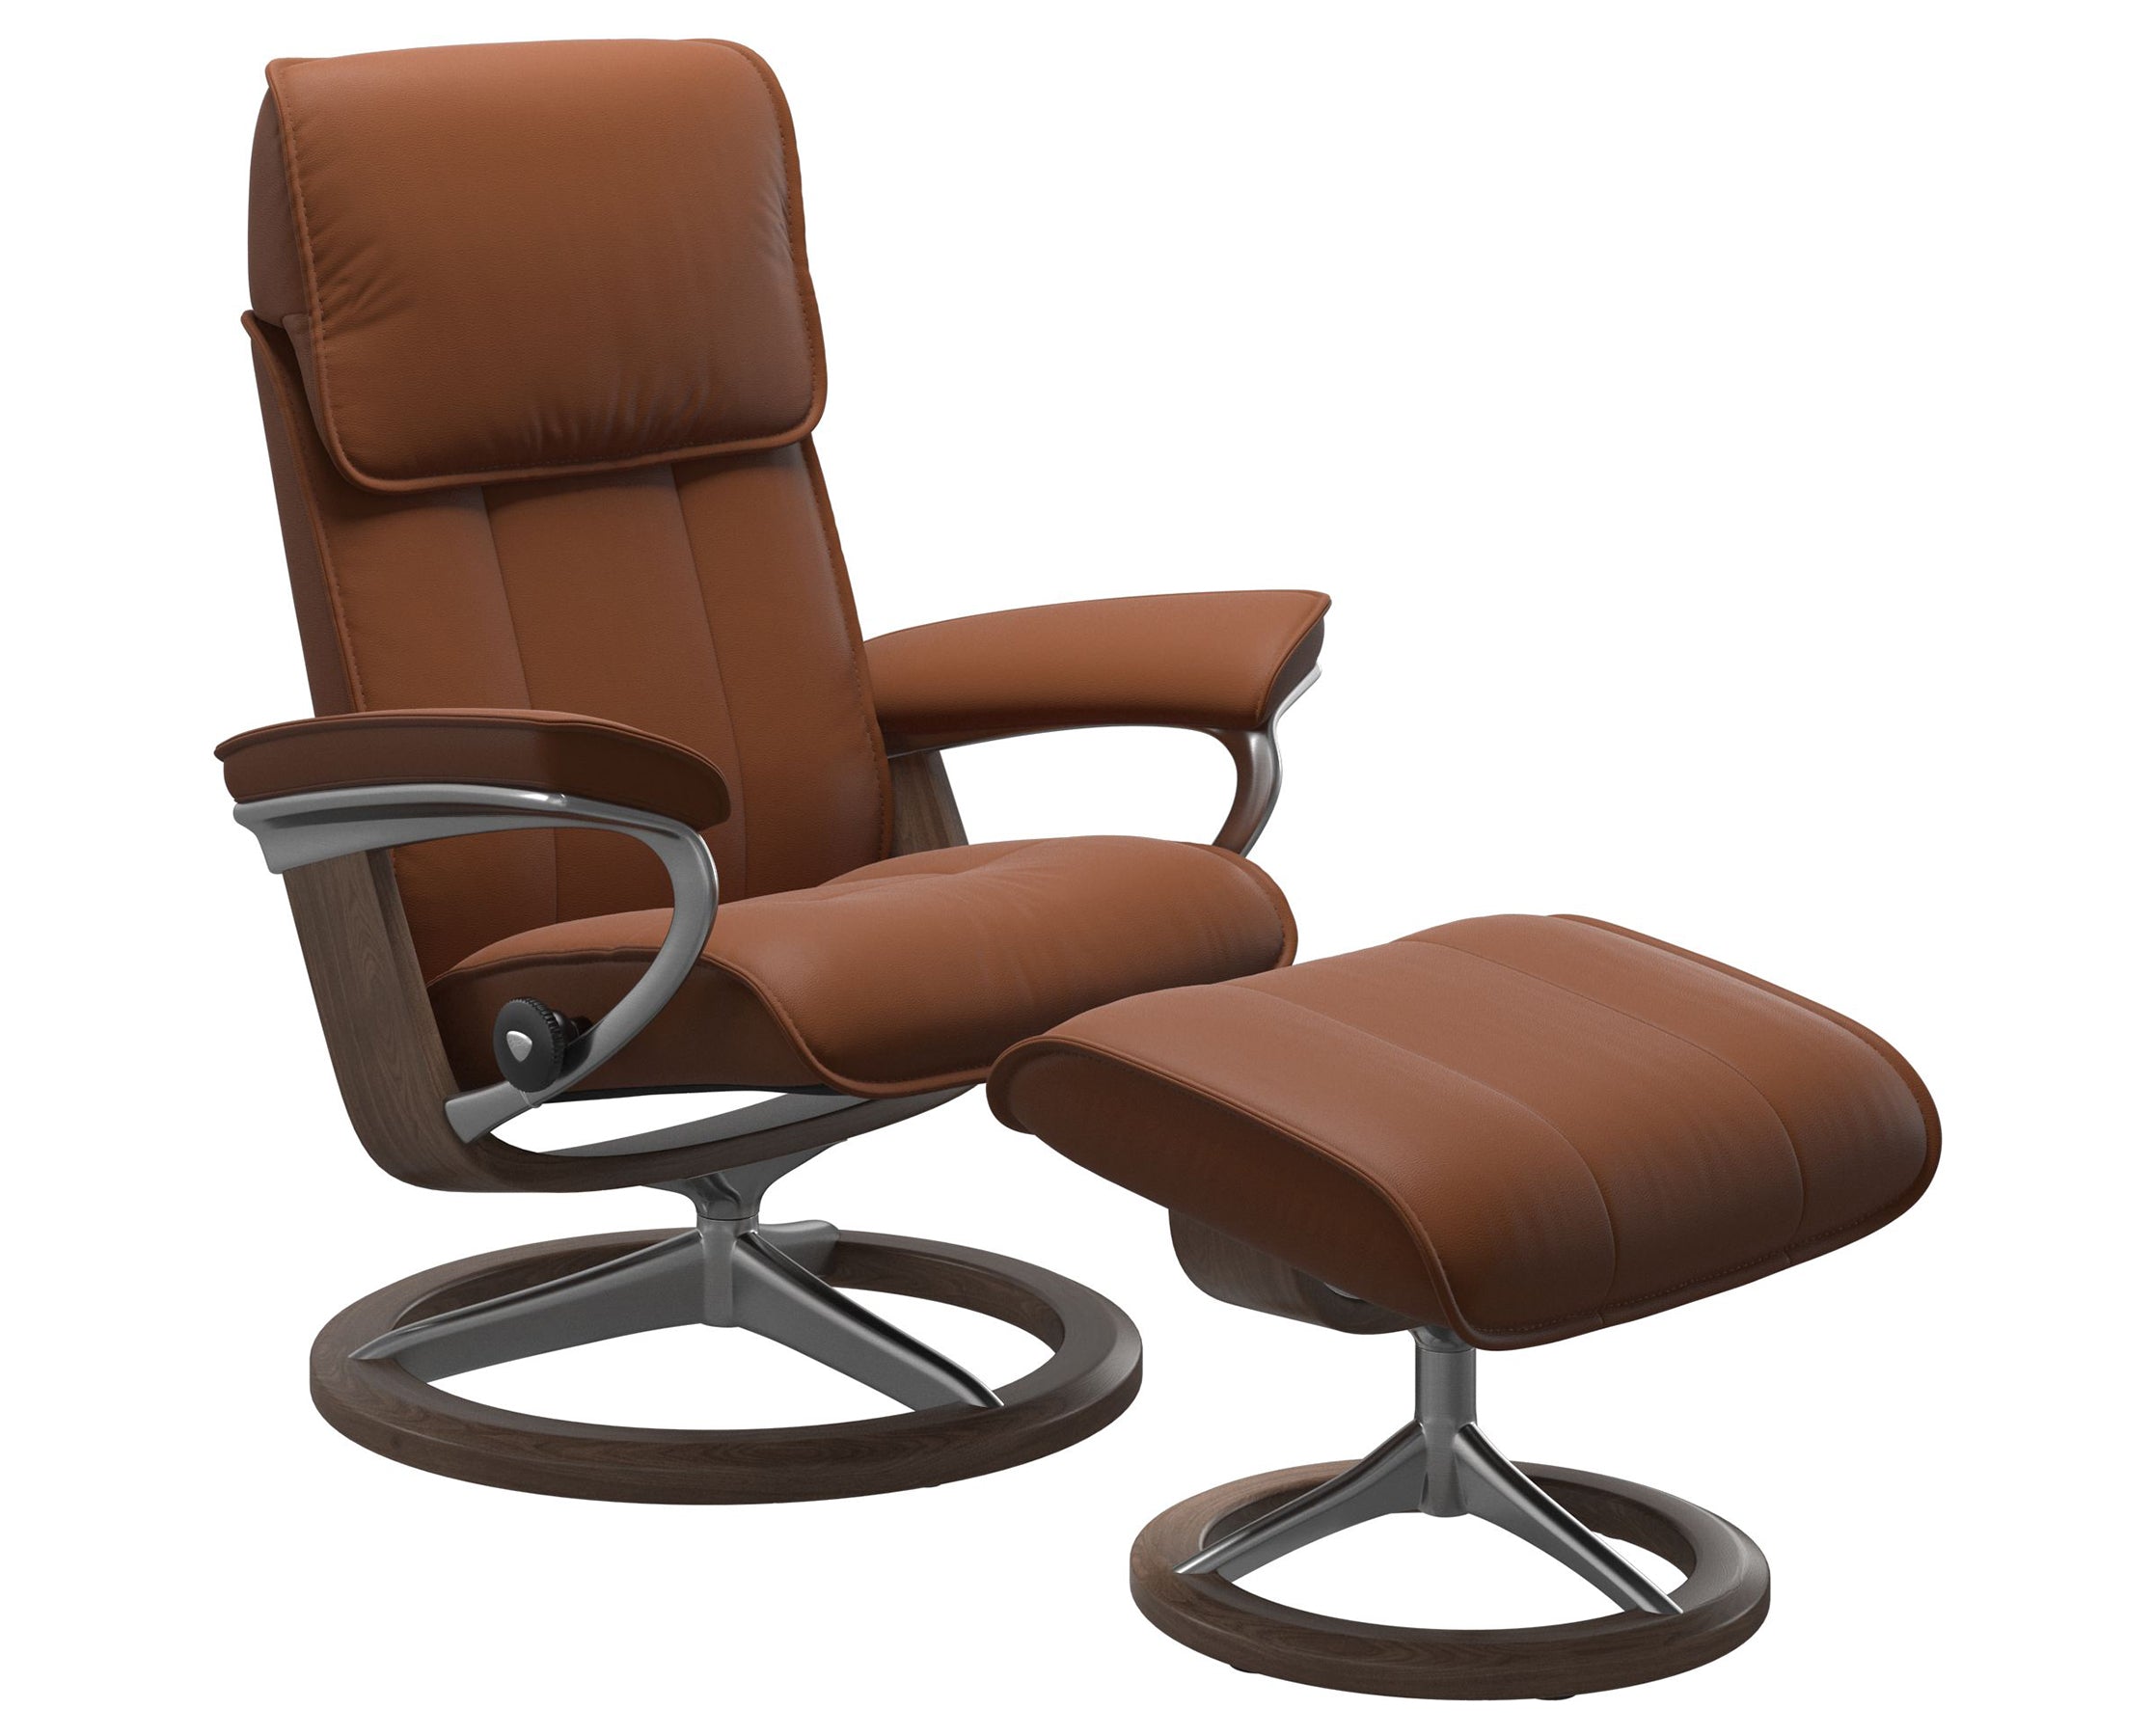 Paloma Leather New Cognac M/L and Walnut Base | Stressless Admiral Signature Recliner | Valley Ridge Furniture